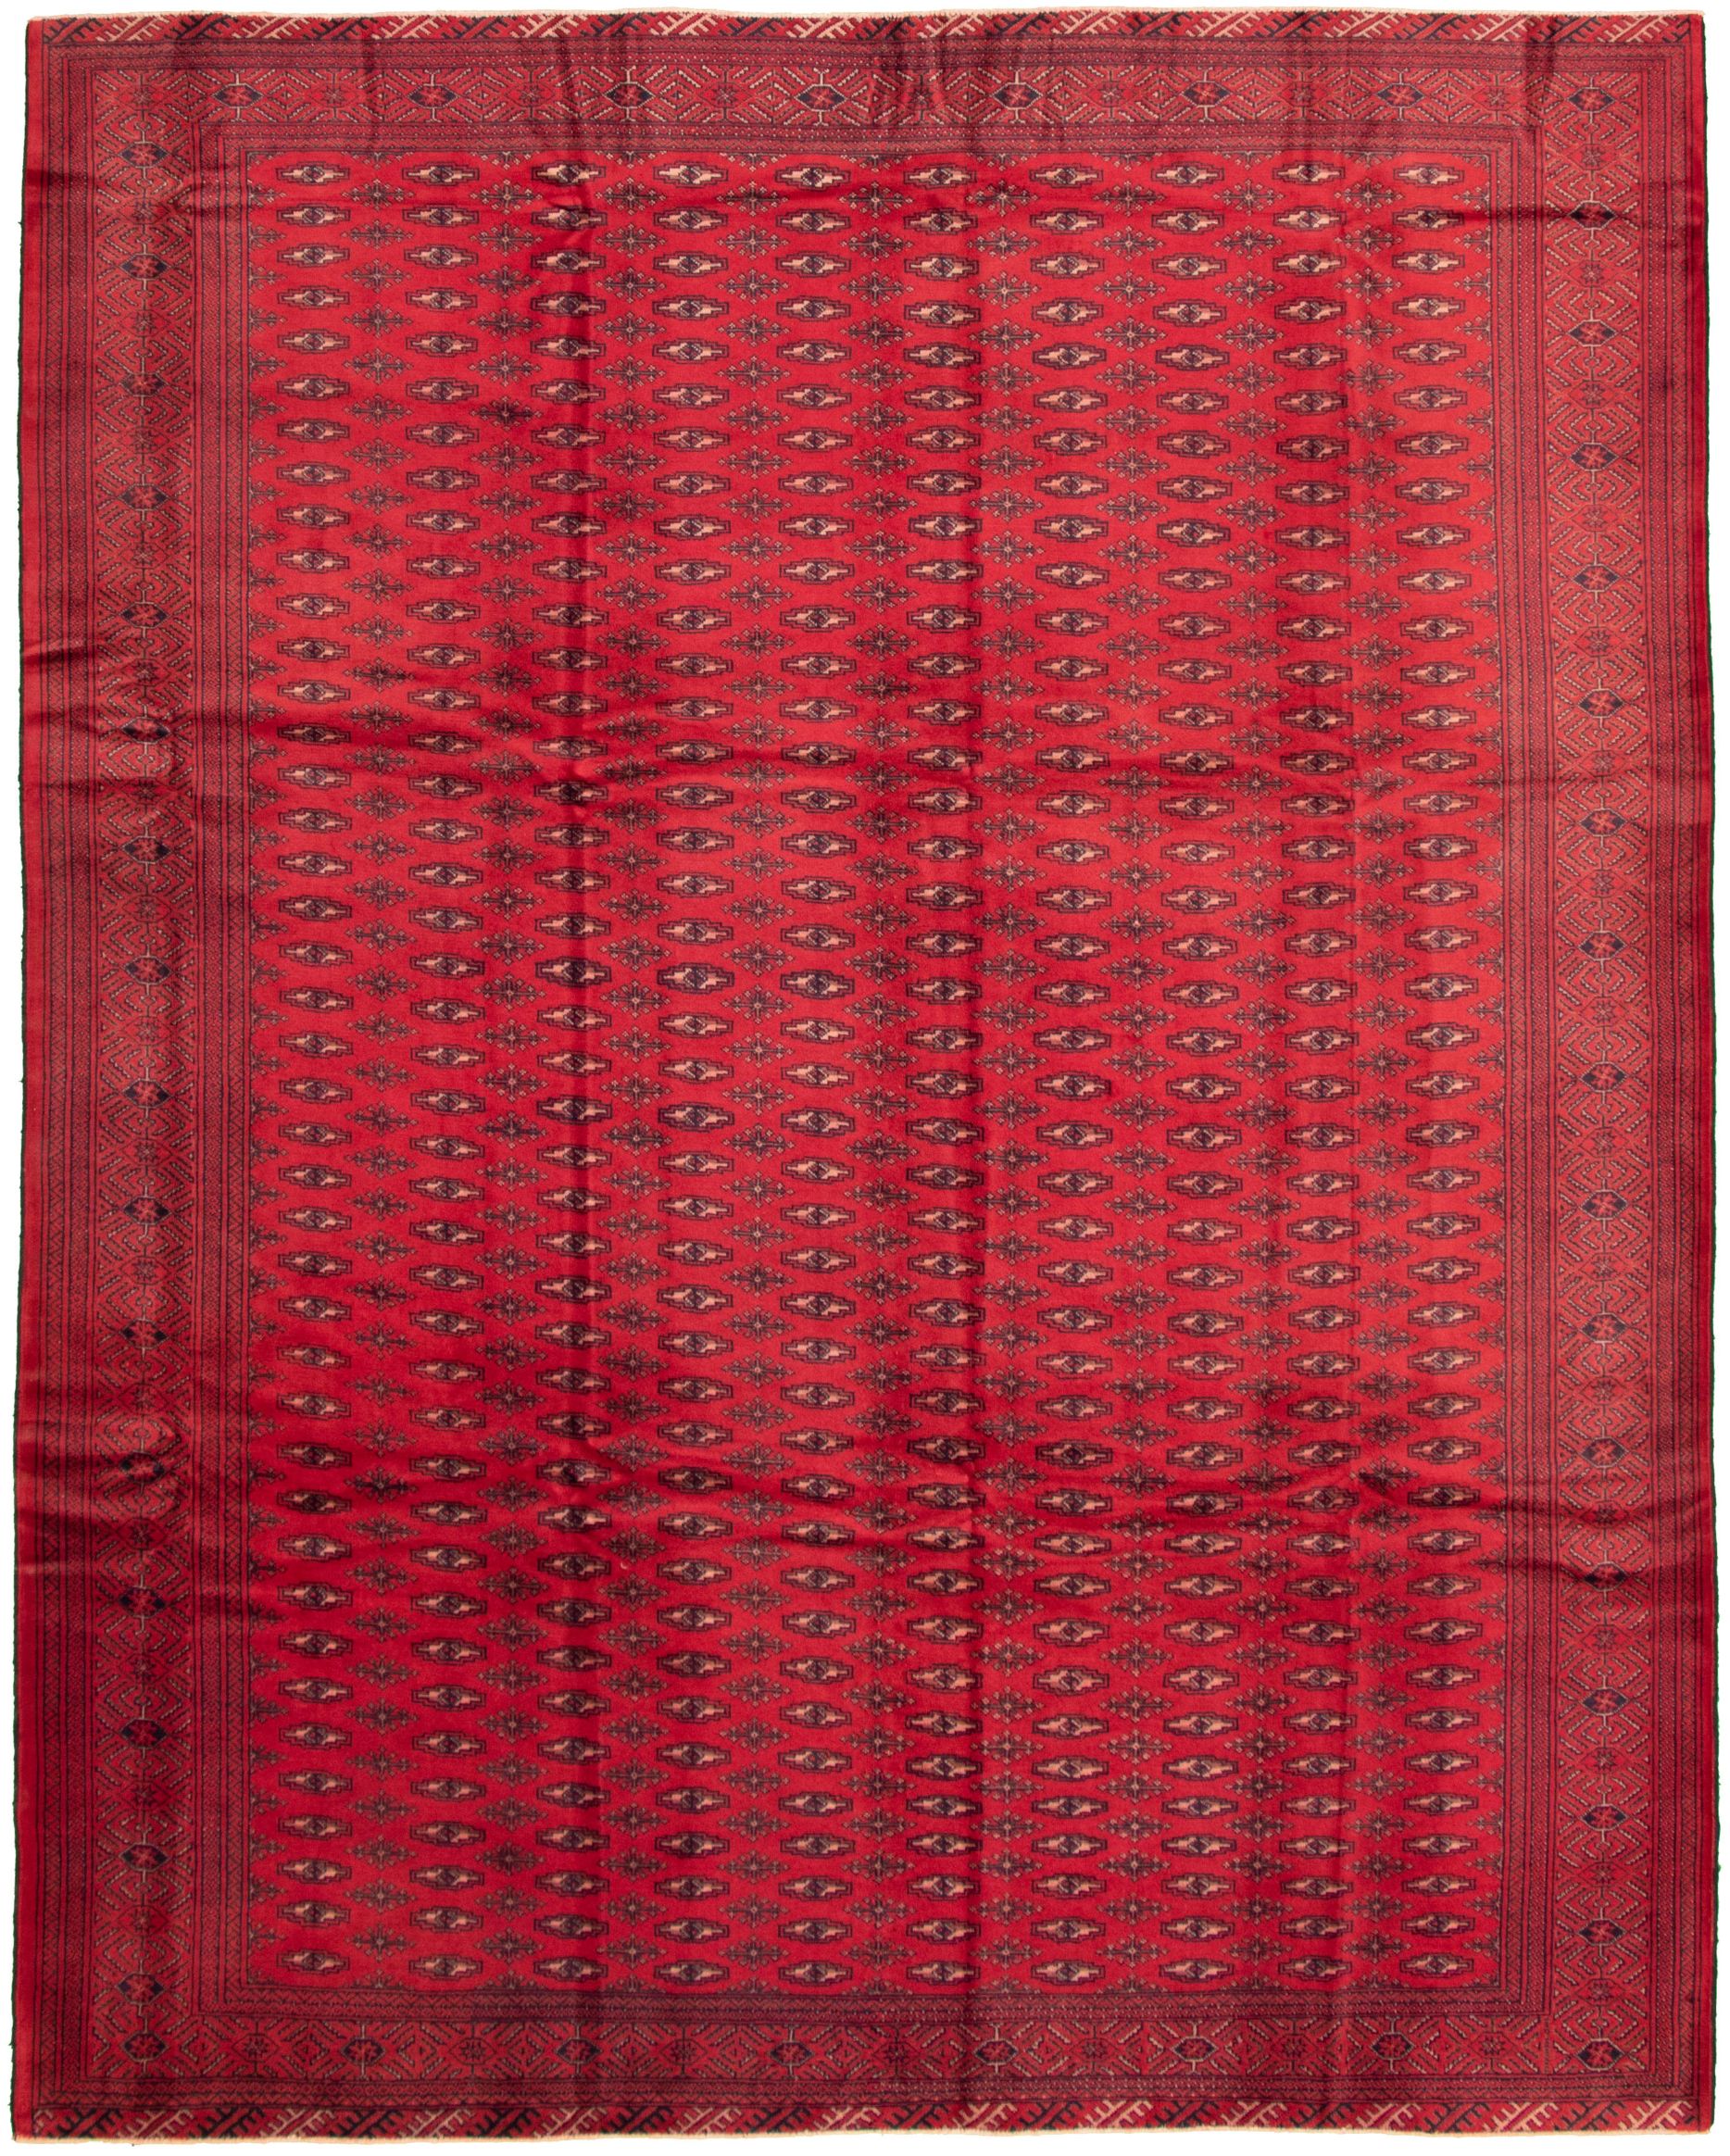 Hand-knotted Khal Mohammadi Red Wool Rug 8'5" x 10'7" Size: 8'5" x 10'7"  